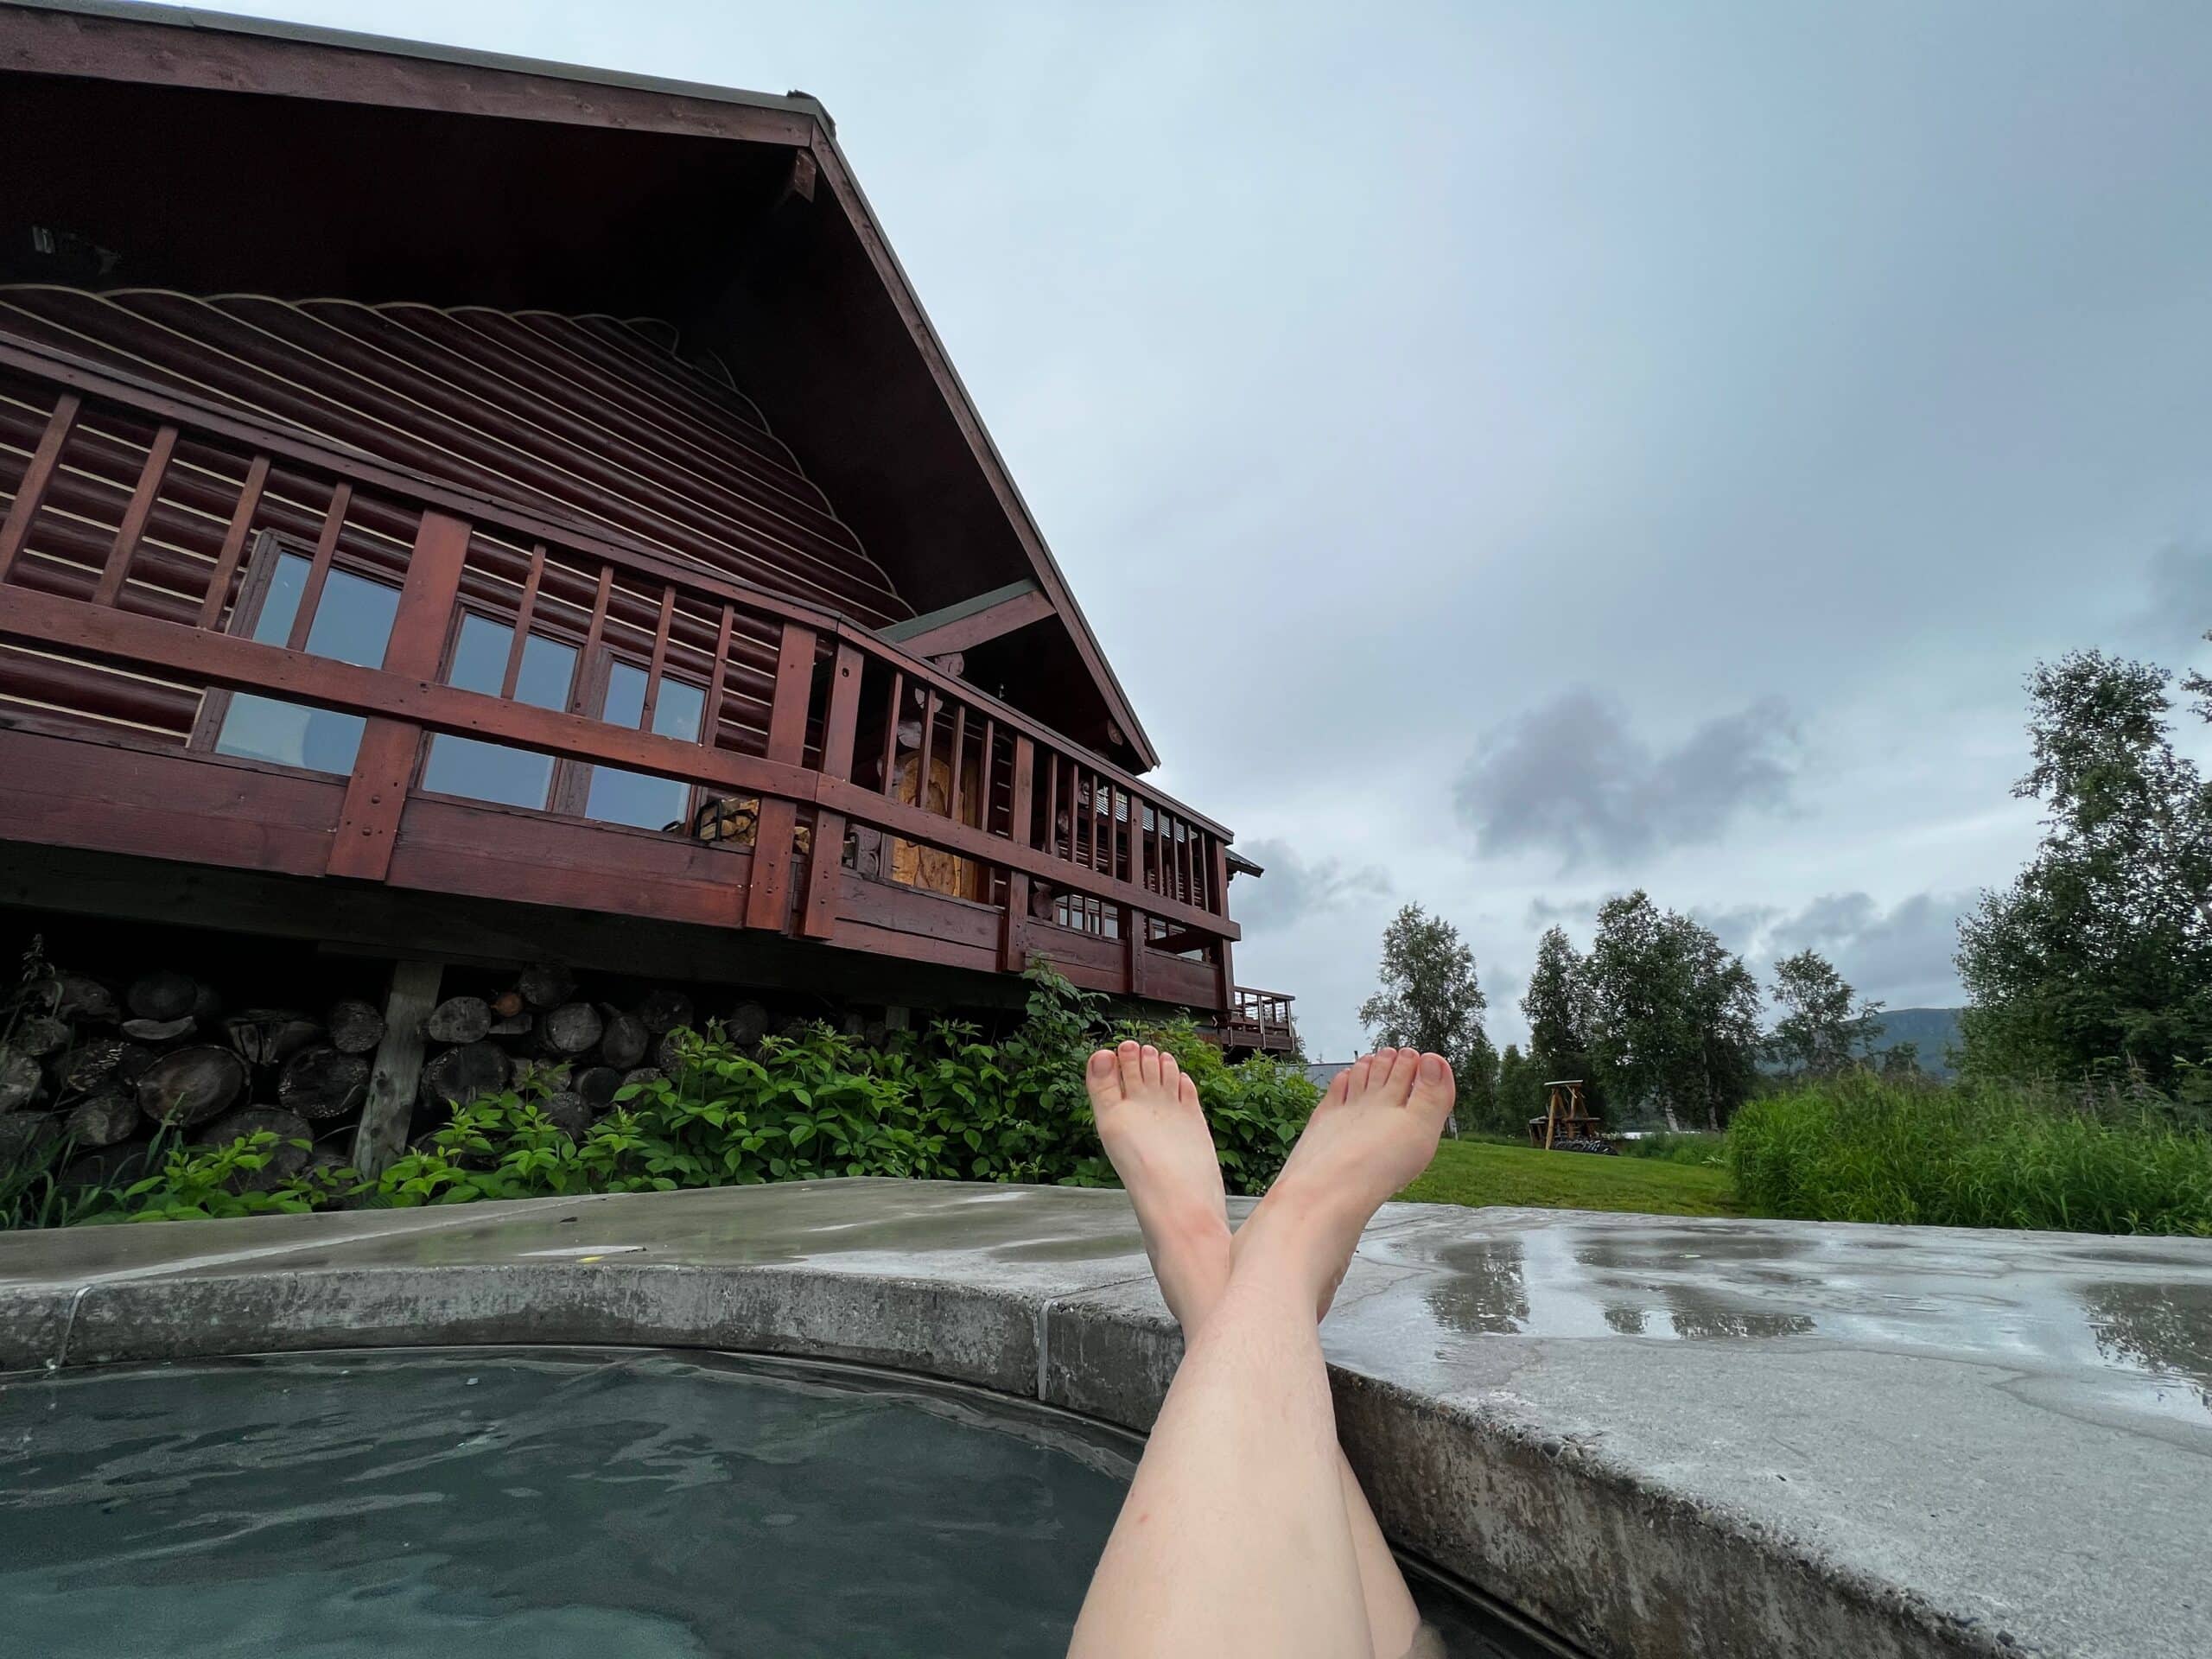 Soaking in the hot tub at Tordrillo lodge